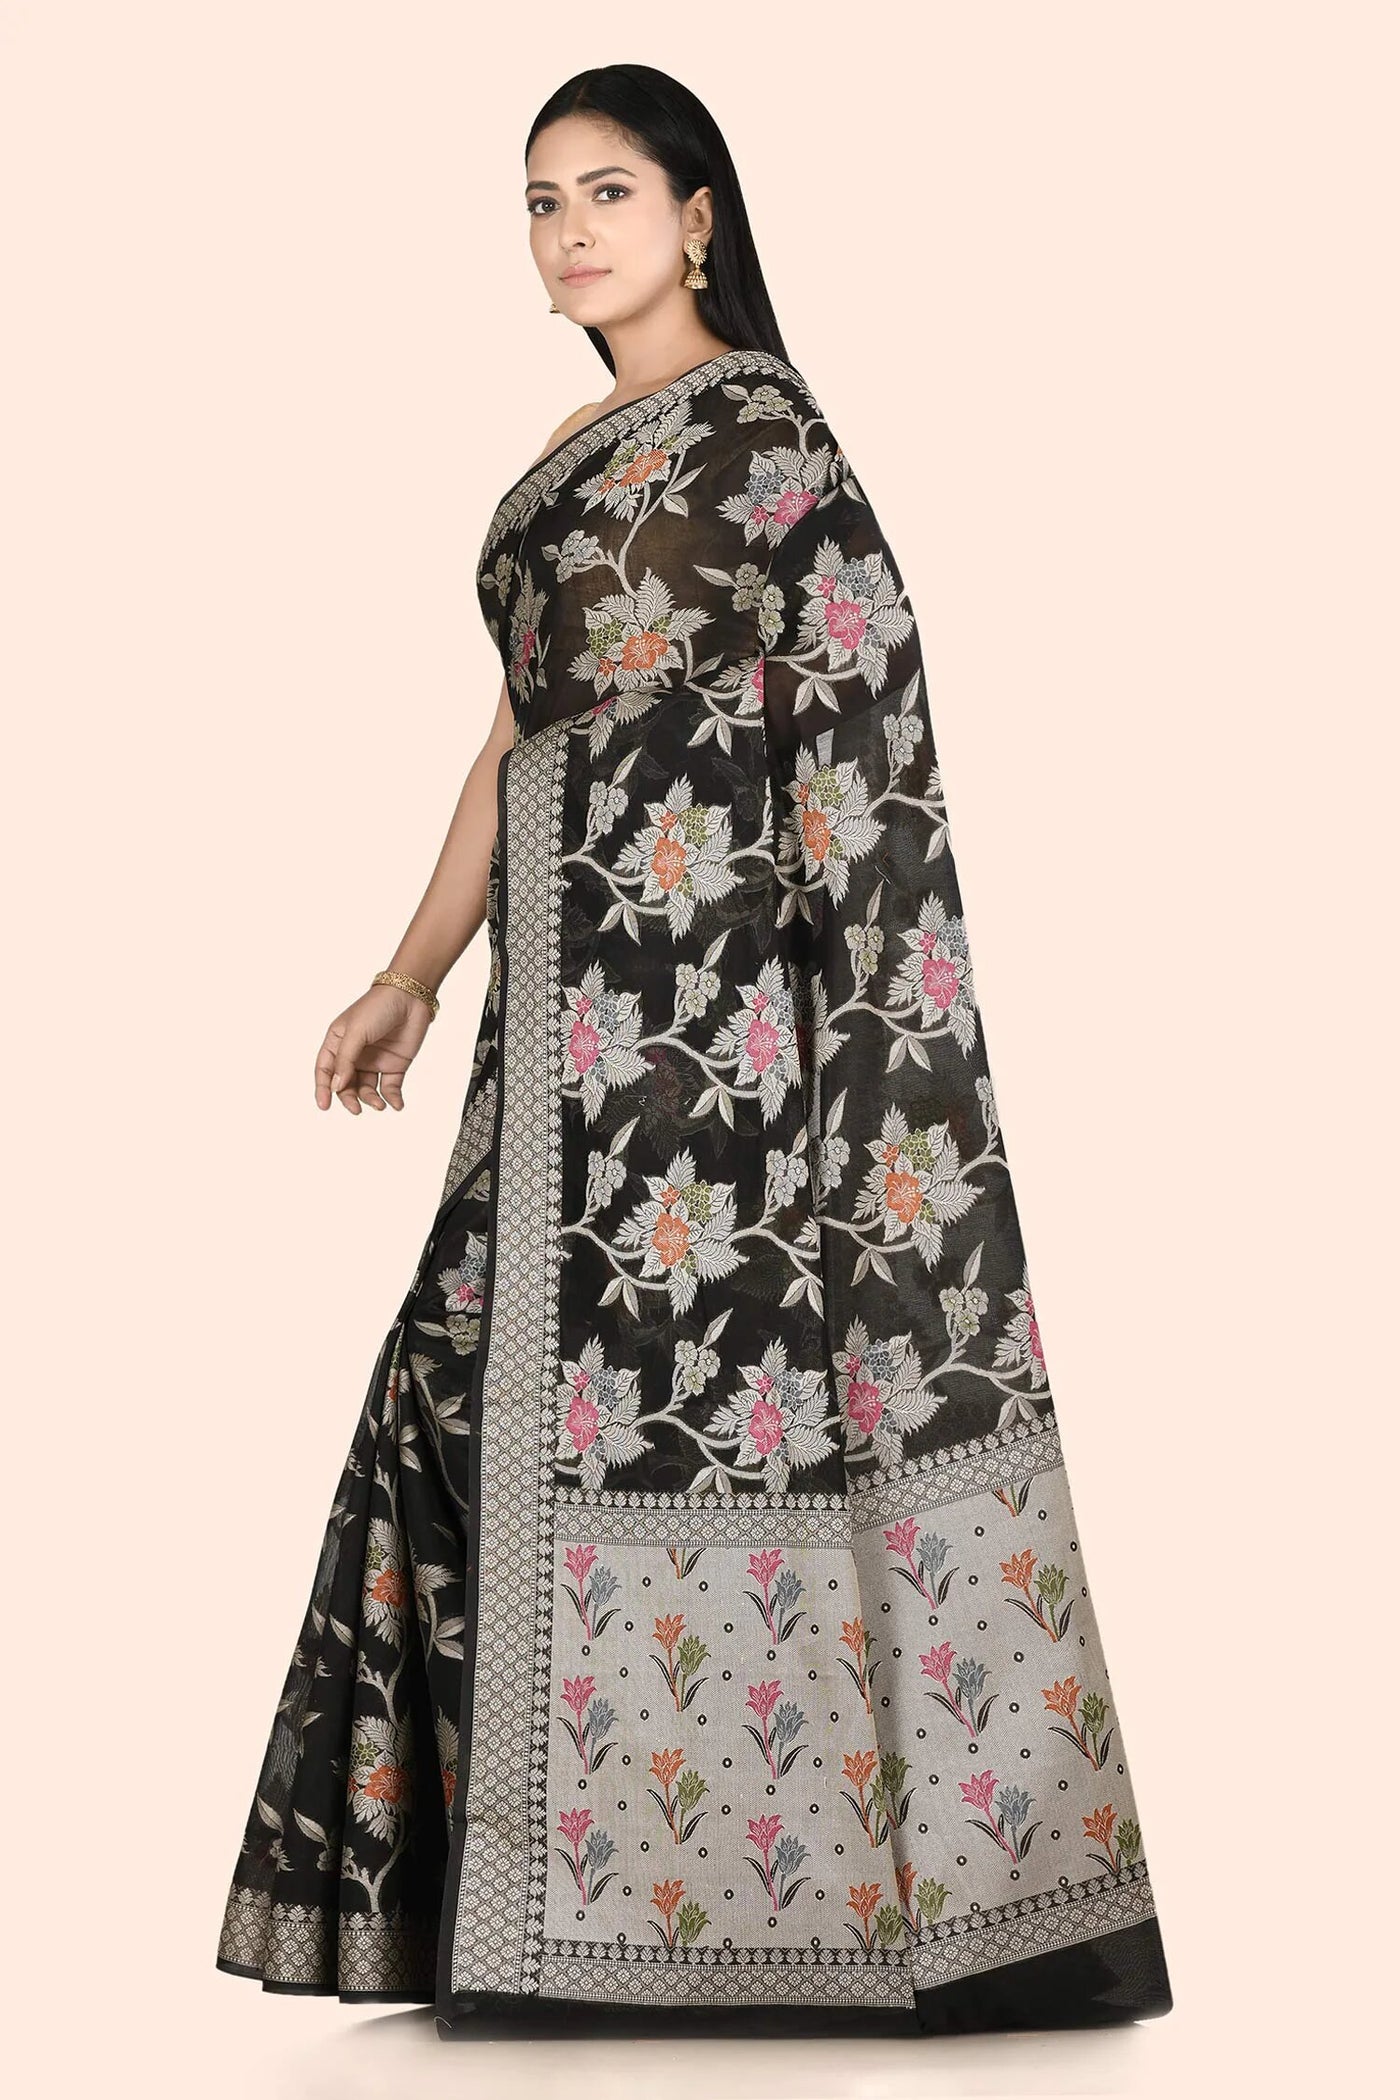 Black Floral Banarasi Saree - Indian Clothing in Denver, CO, Aurora, CO, Boulder, CO, Fort Collins, CO, Colorado Springs, CO, Parker, CO, Highlands Ranch, CO, Cherry Creek, CO, Centennial, CO, and Longmont, CO. Nationwide shipping USA - India Fashion X